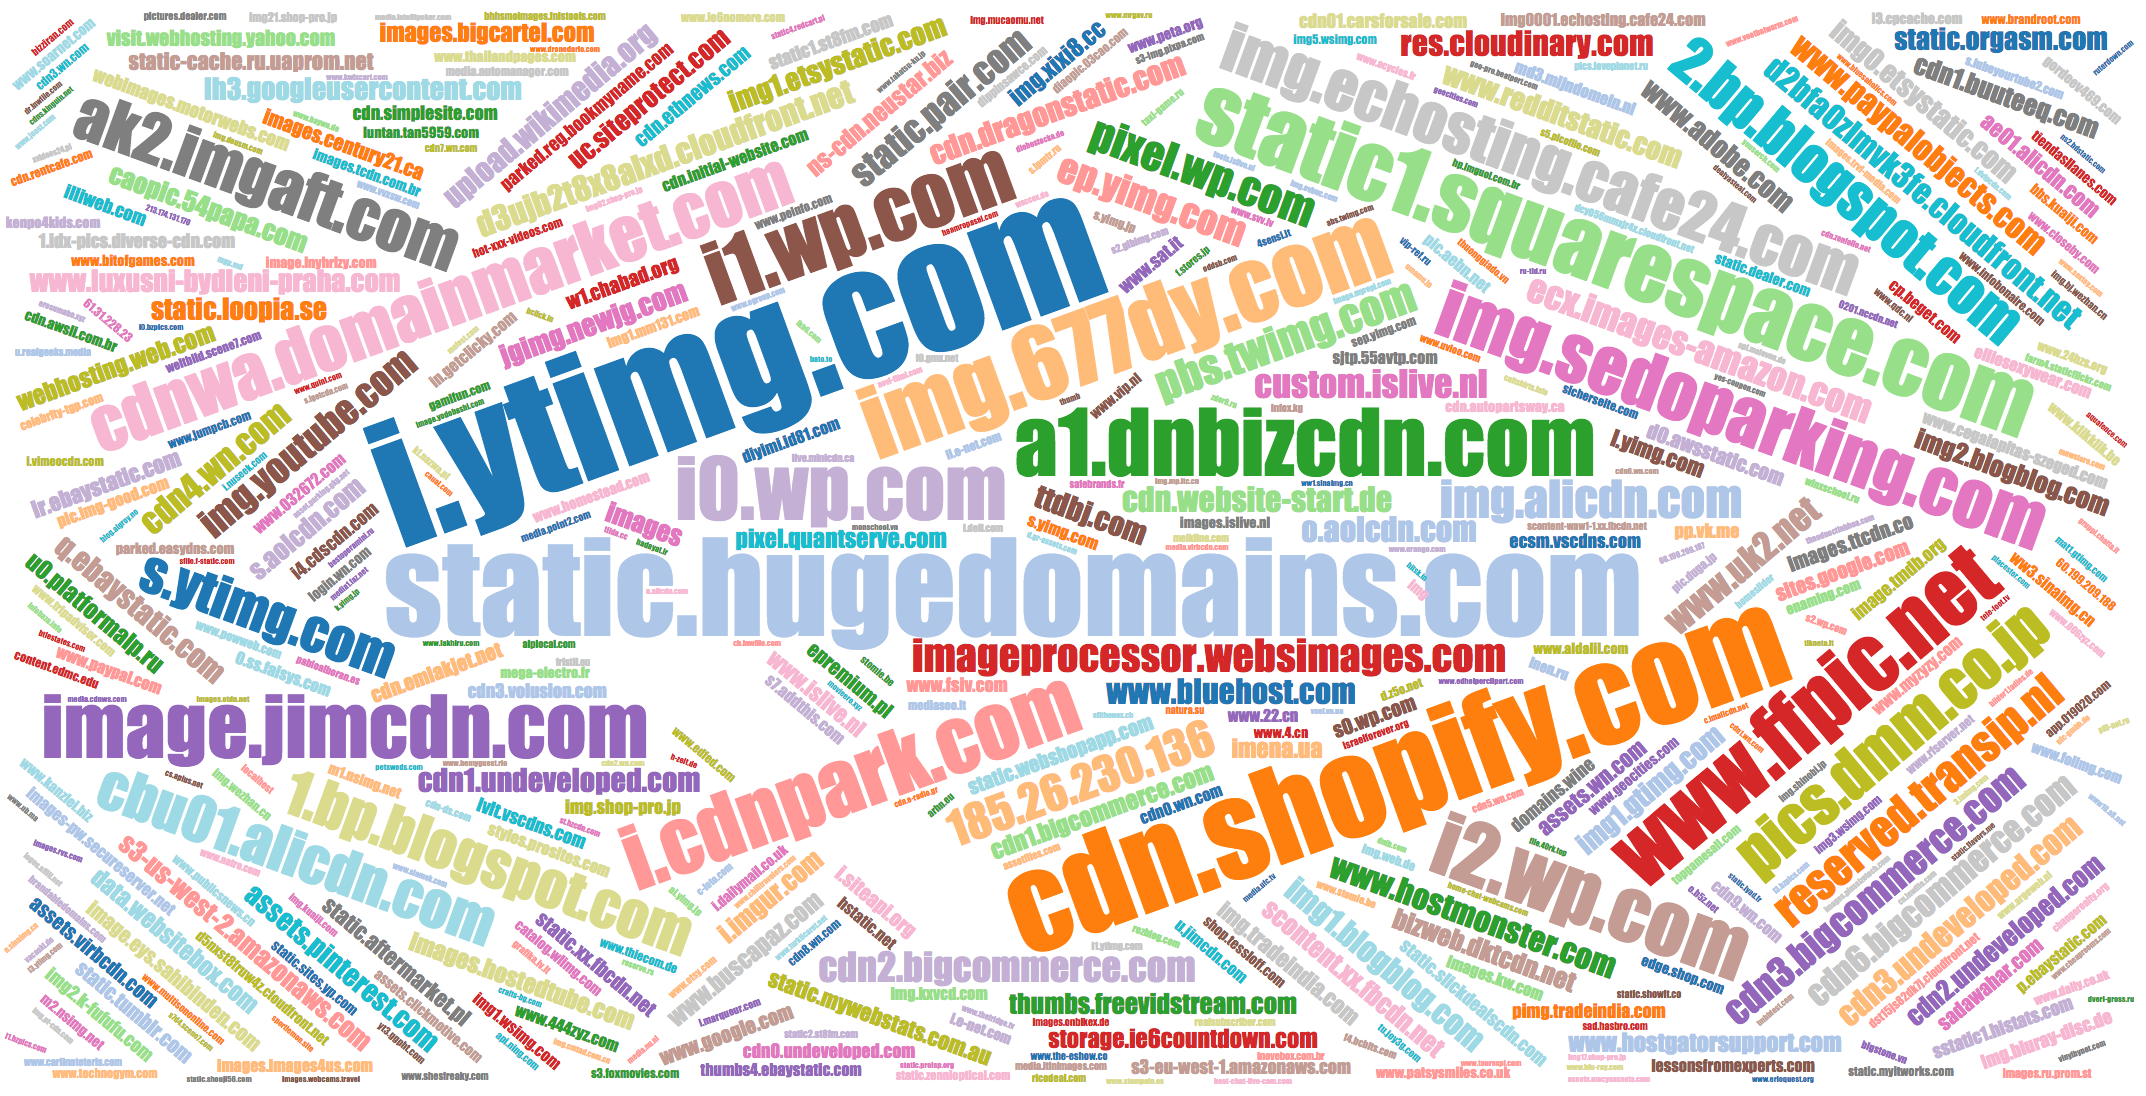 Popular names of IMG domains diaopic.993pao.com, d2qcctj8epnr7y.cloudfront.net, etc.